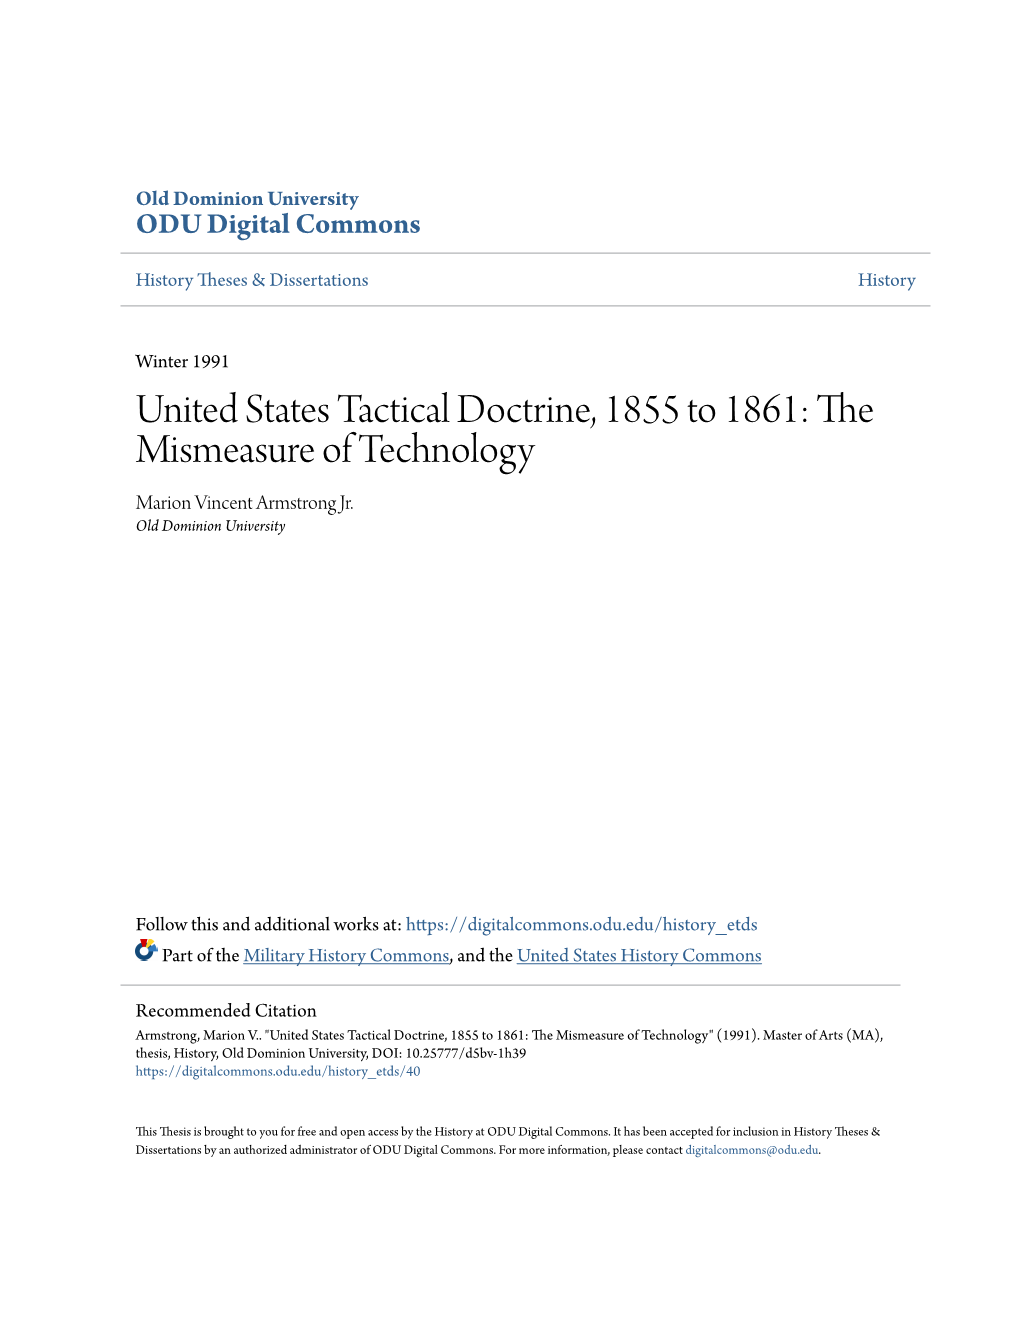 United States Tactical Doctrine, 1855 to 1861: the Mismeasure of Technology Marion Vincent Armstrong Jr